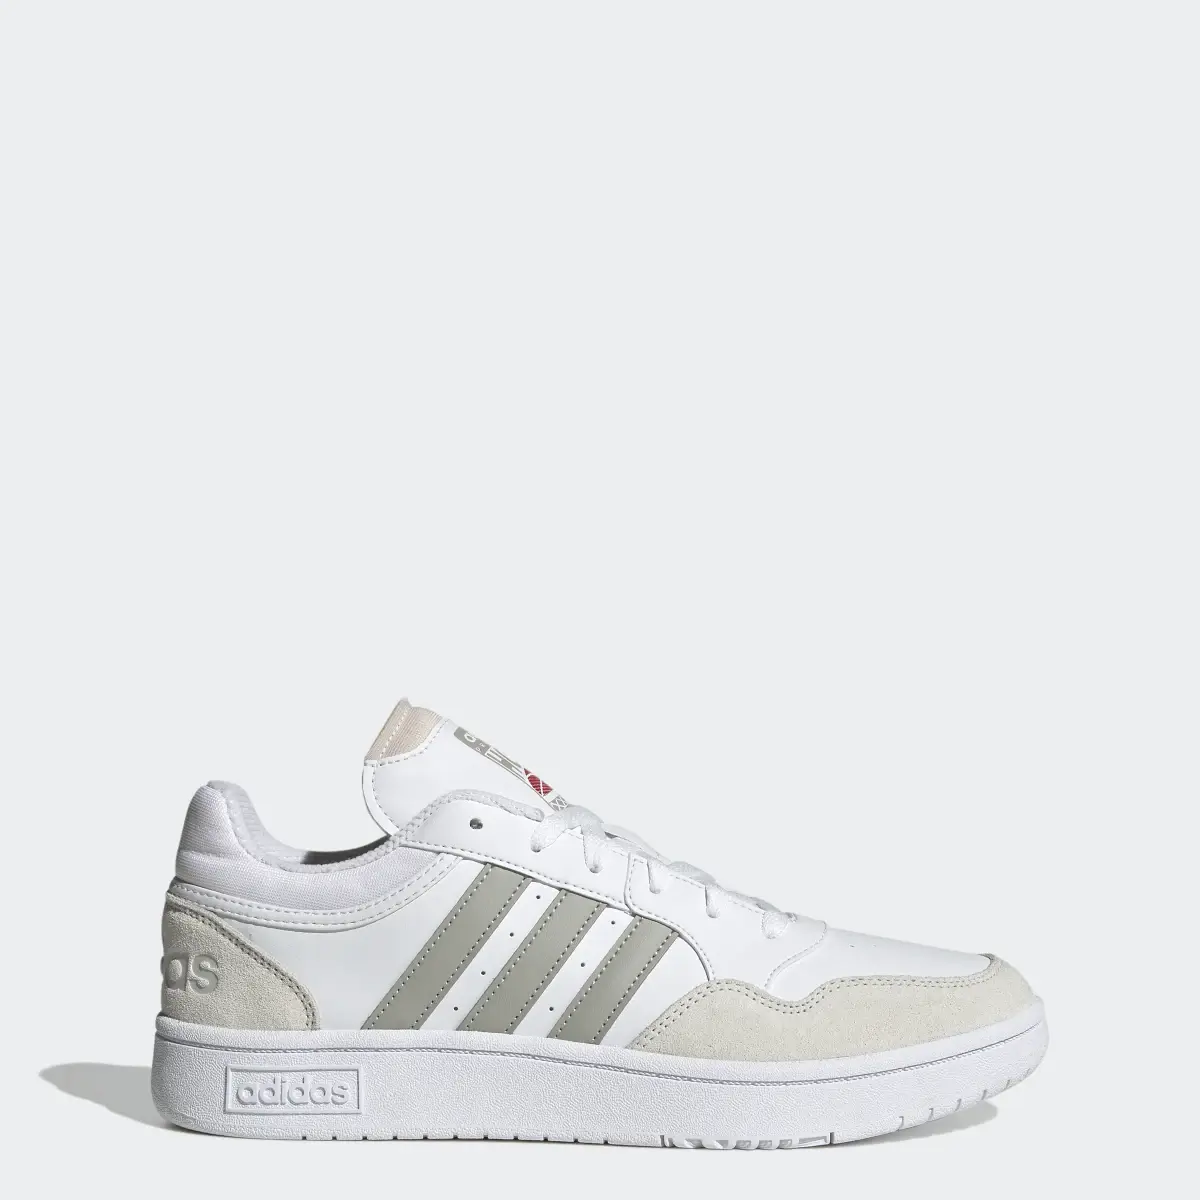 Adidas Hoops 3.0 Lifestyle Basketball Low Classic Vintage Schuh. 1